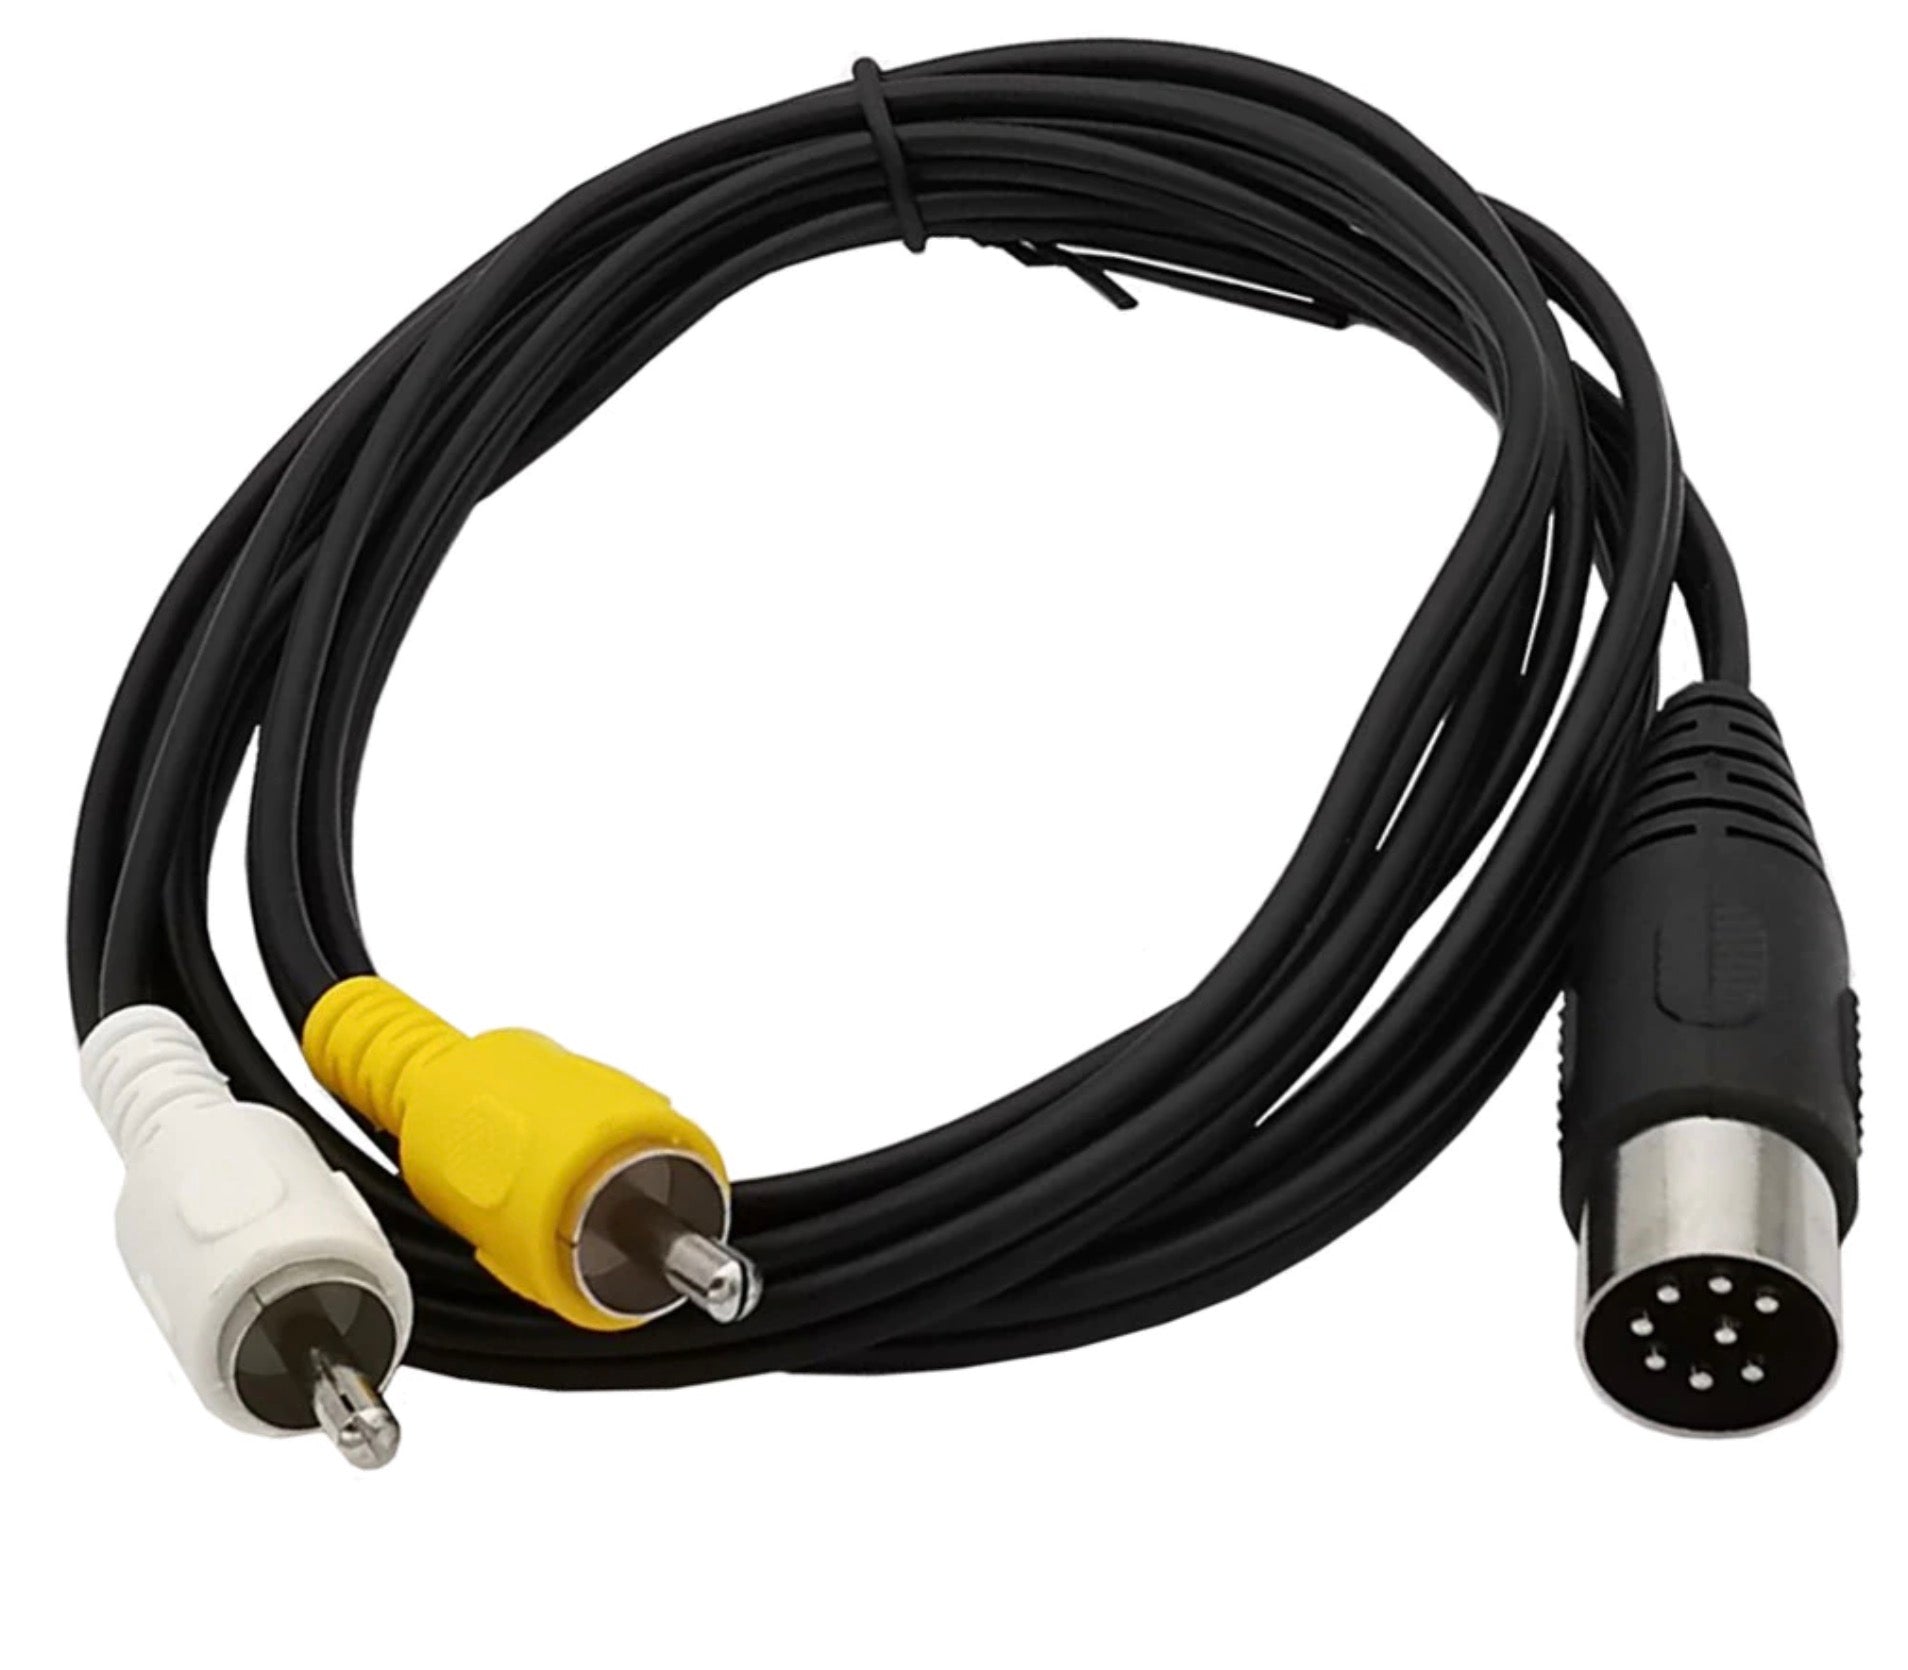 8-Pin Din Male Plug to Dual RCA Male Audio Adapter Cable